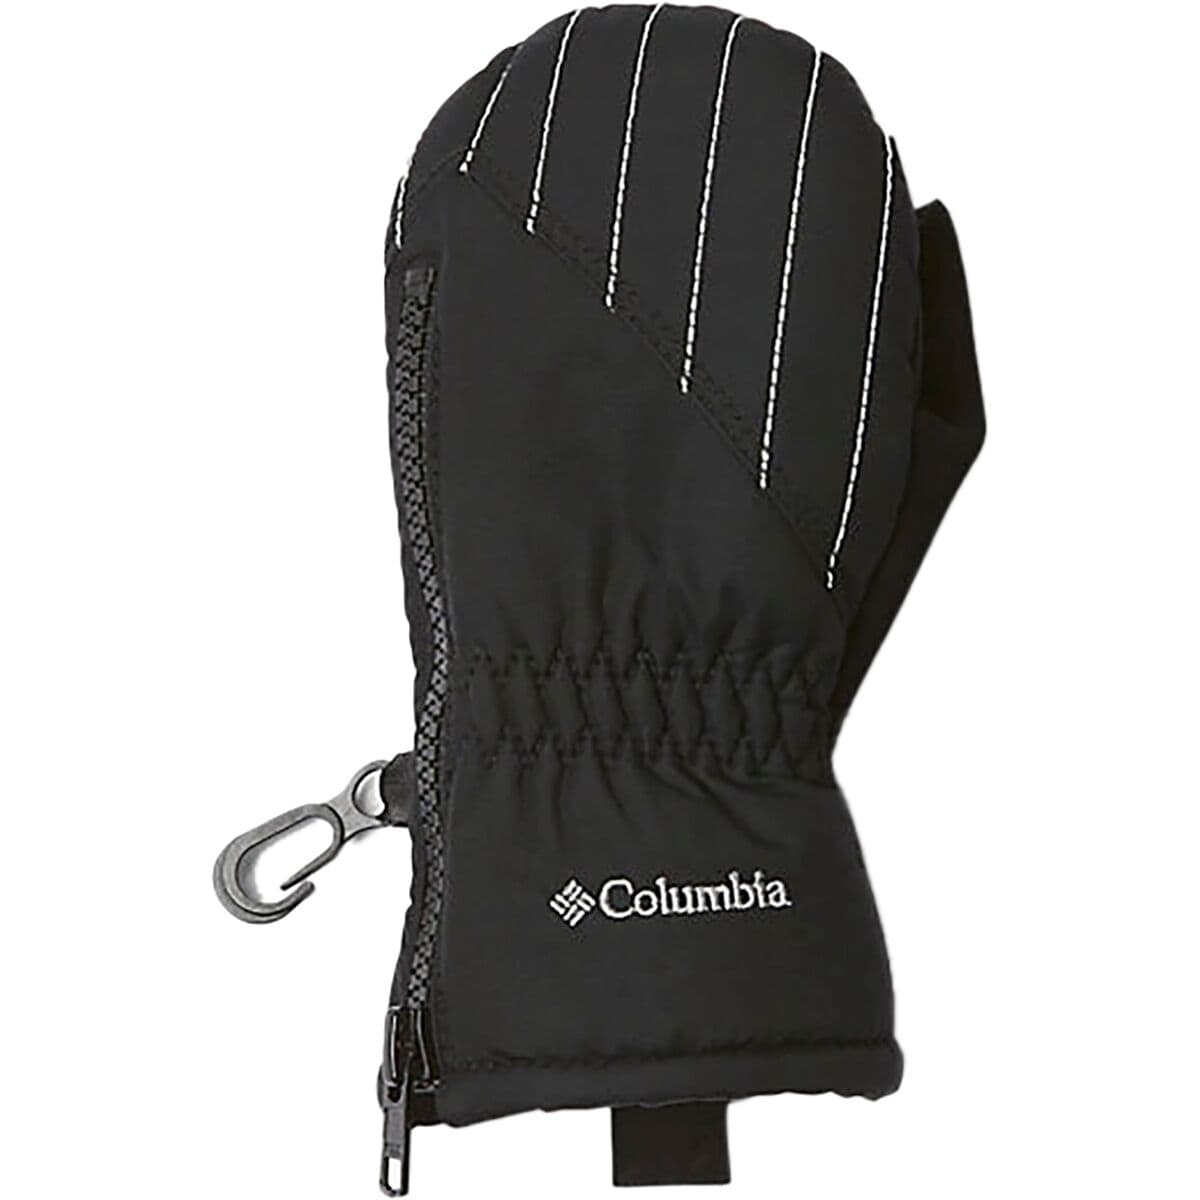 Photos - Winter Gloves & Mittens Columbia Chippewa II Mitten - Toddlers' 